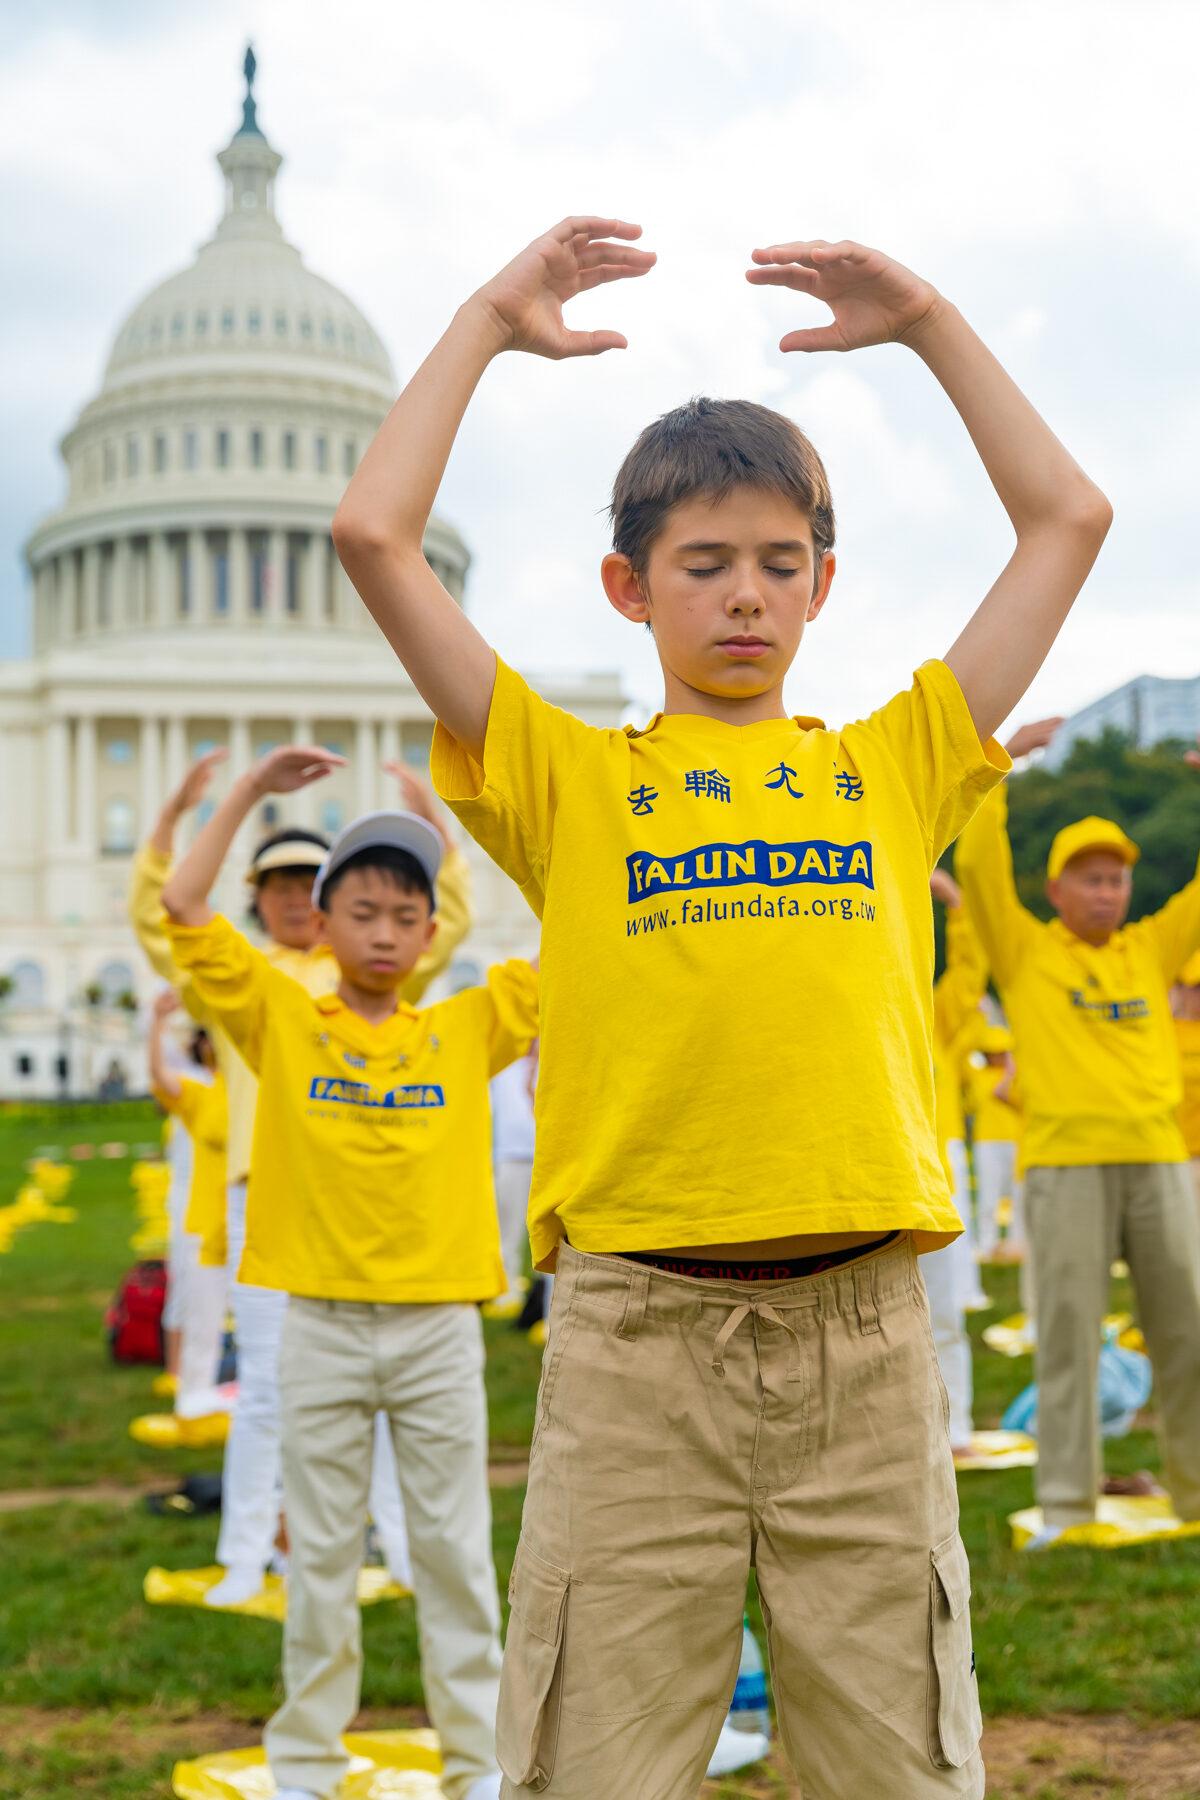 Falun Gong practitioners perform the exercises at a rally commemorating the 20th anniversary of the persecution of Falun Gong in China, on the West Lawn of Capitol Hill, on July 18, 2019. (Mark Zou/The Epoch Times)